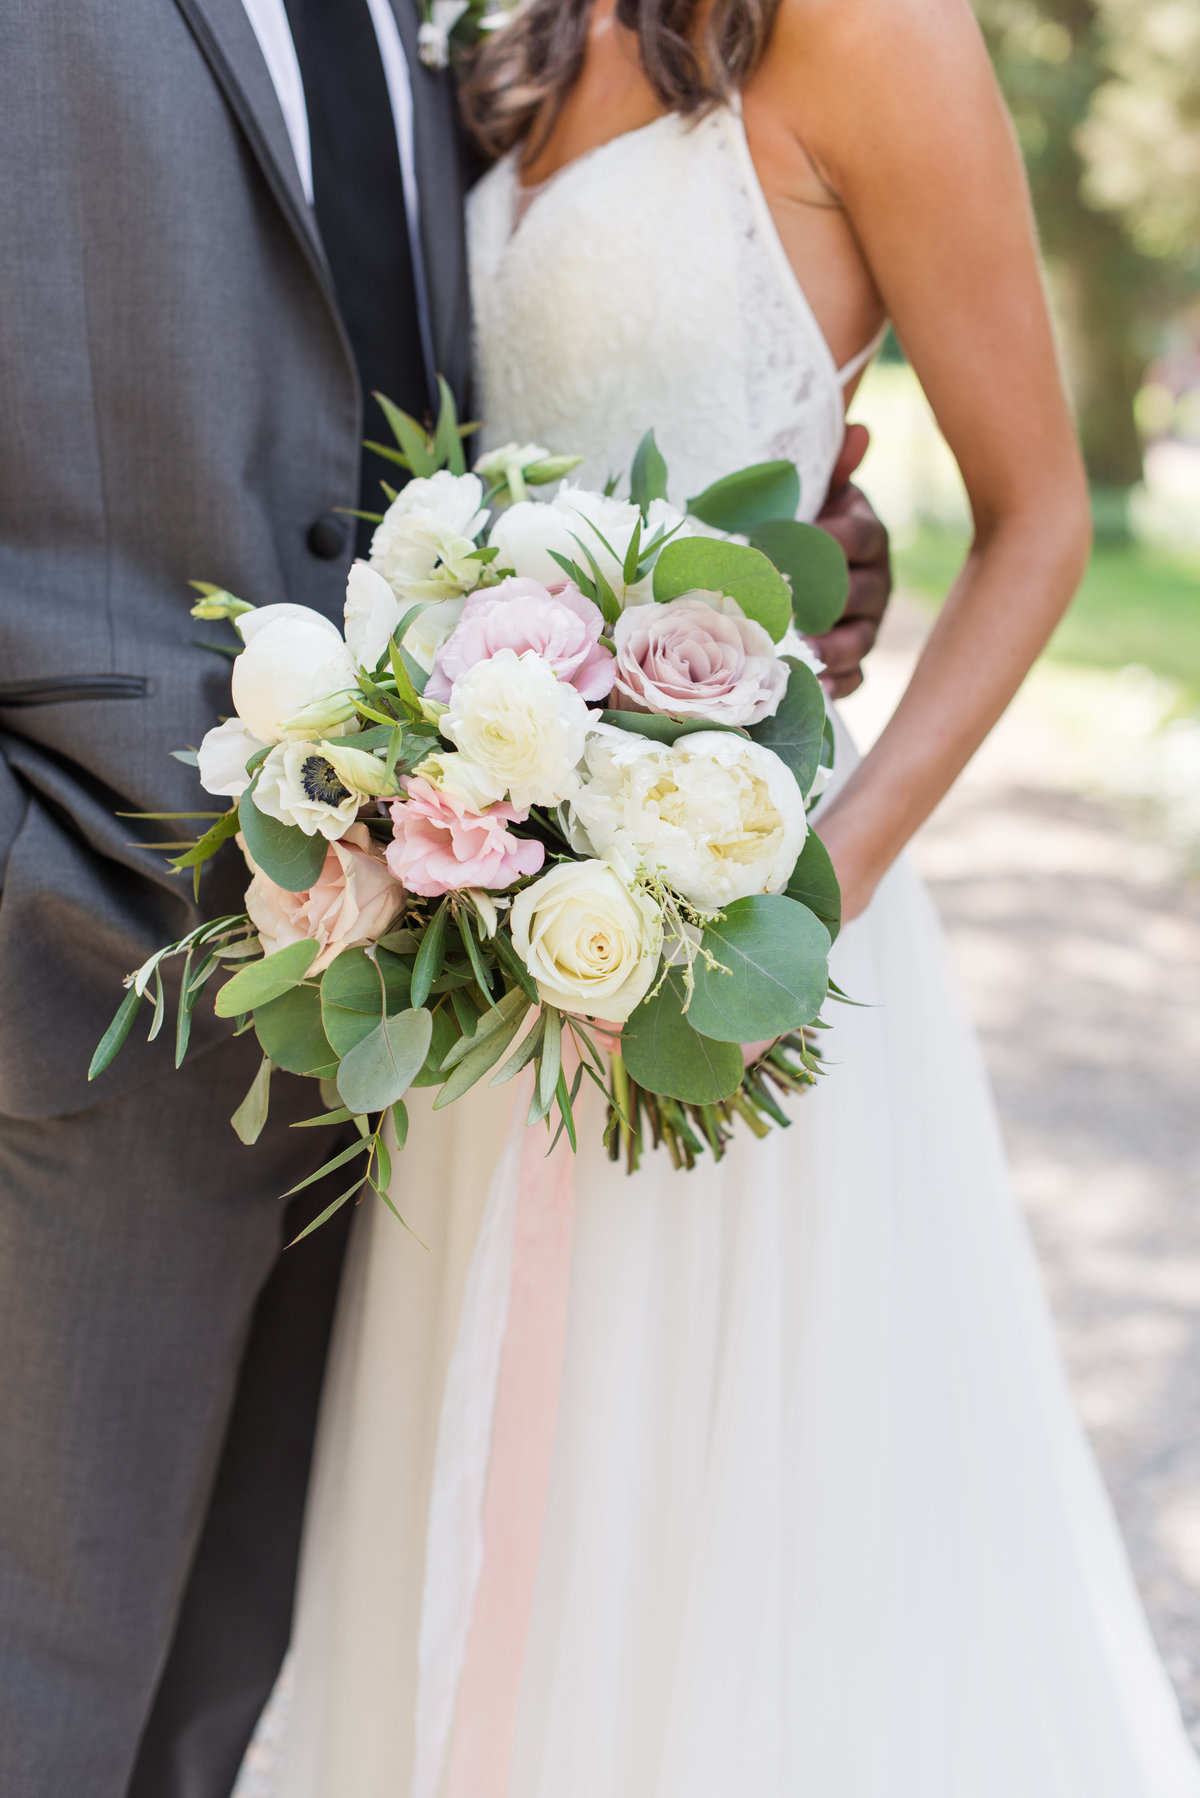 Detail of bouquet with garden roses